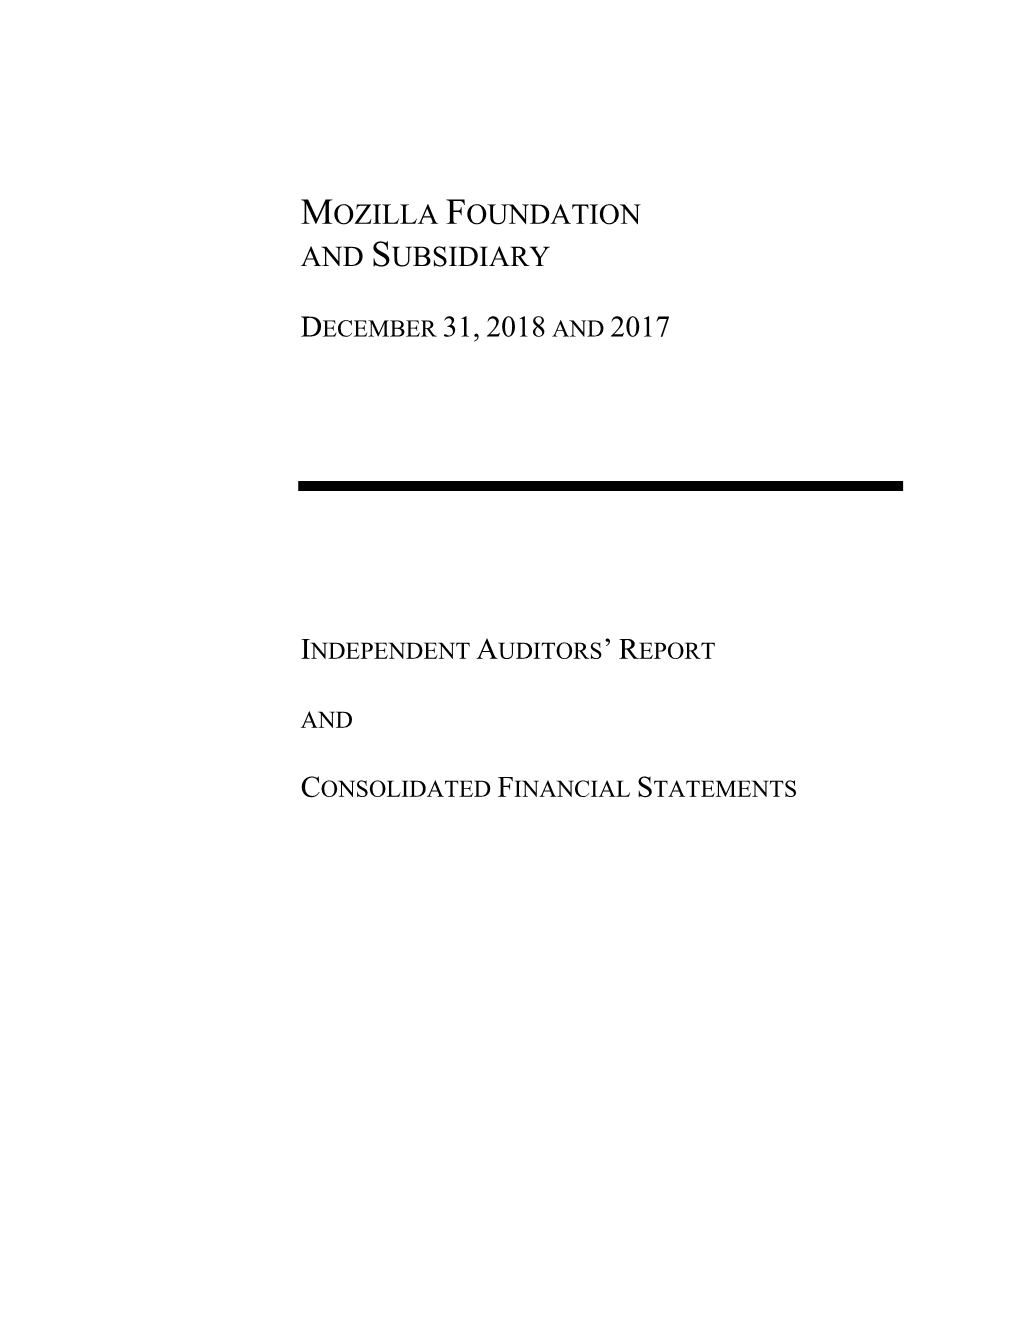 Mozilla Foundation and Subsidiary, December 31, 2018 and 2017